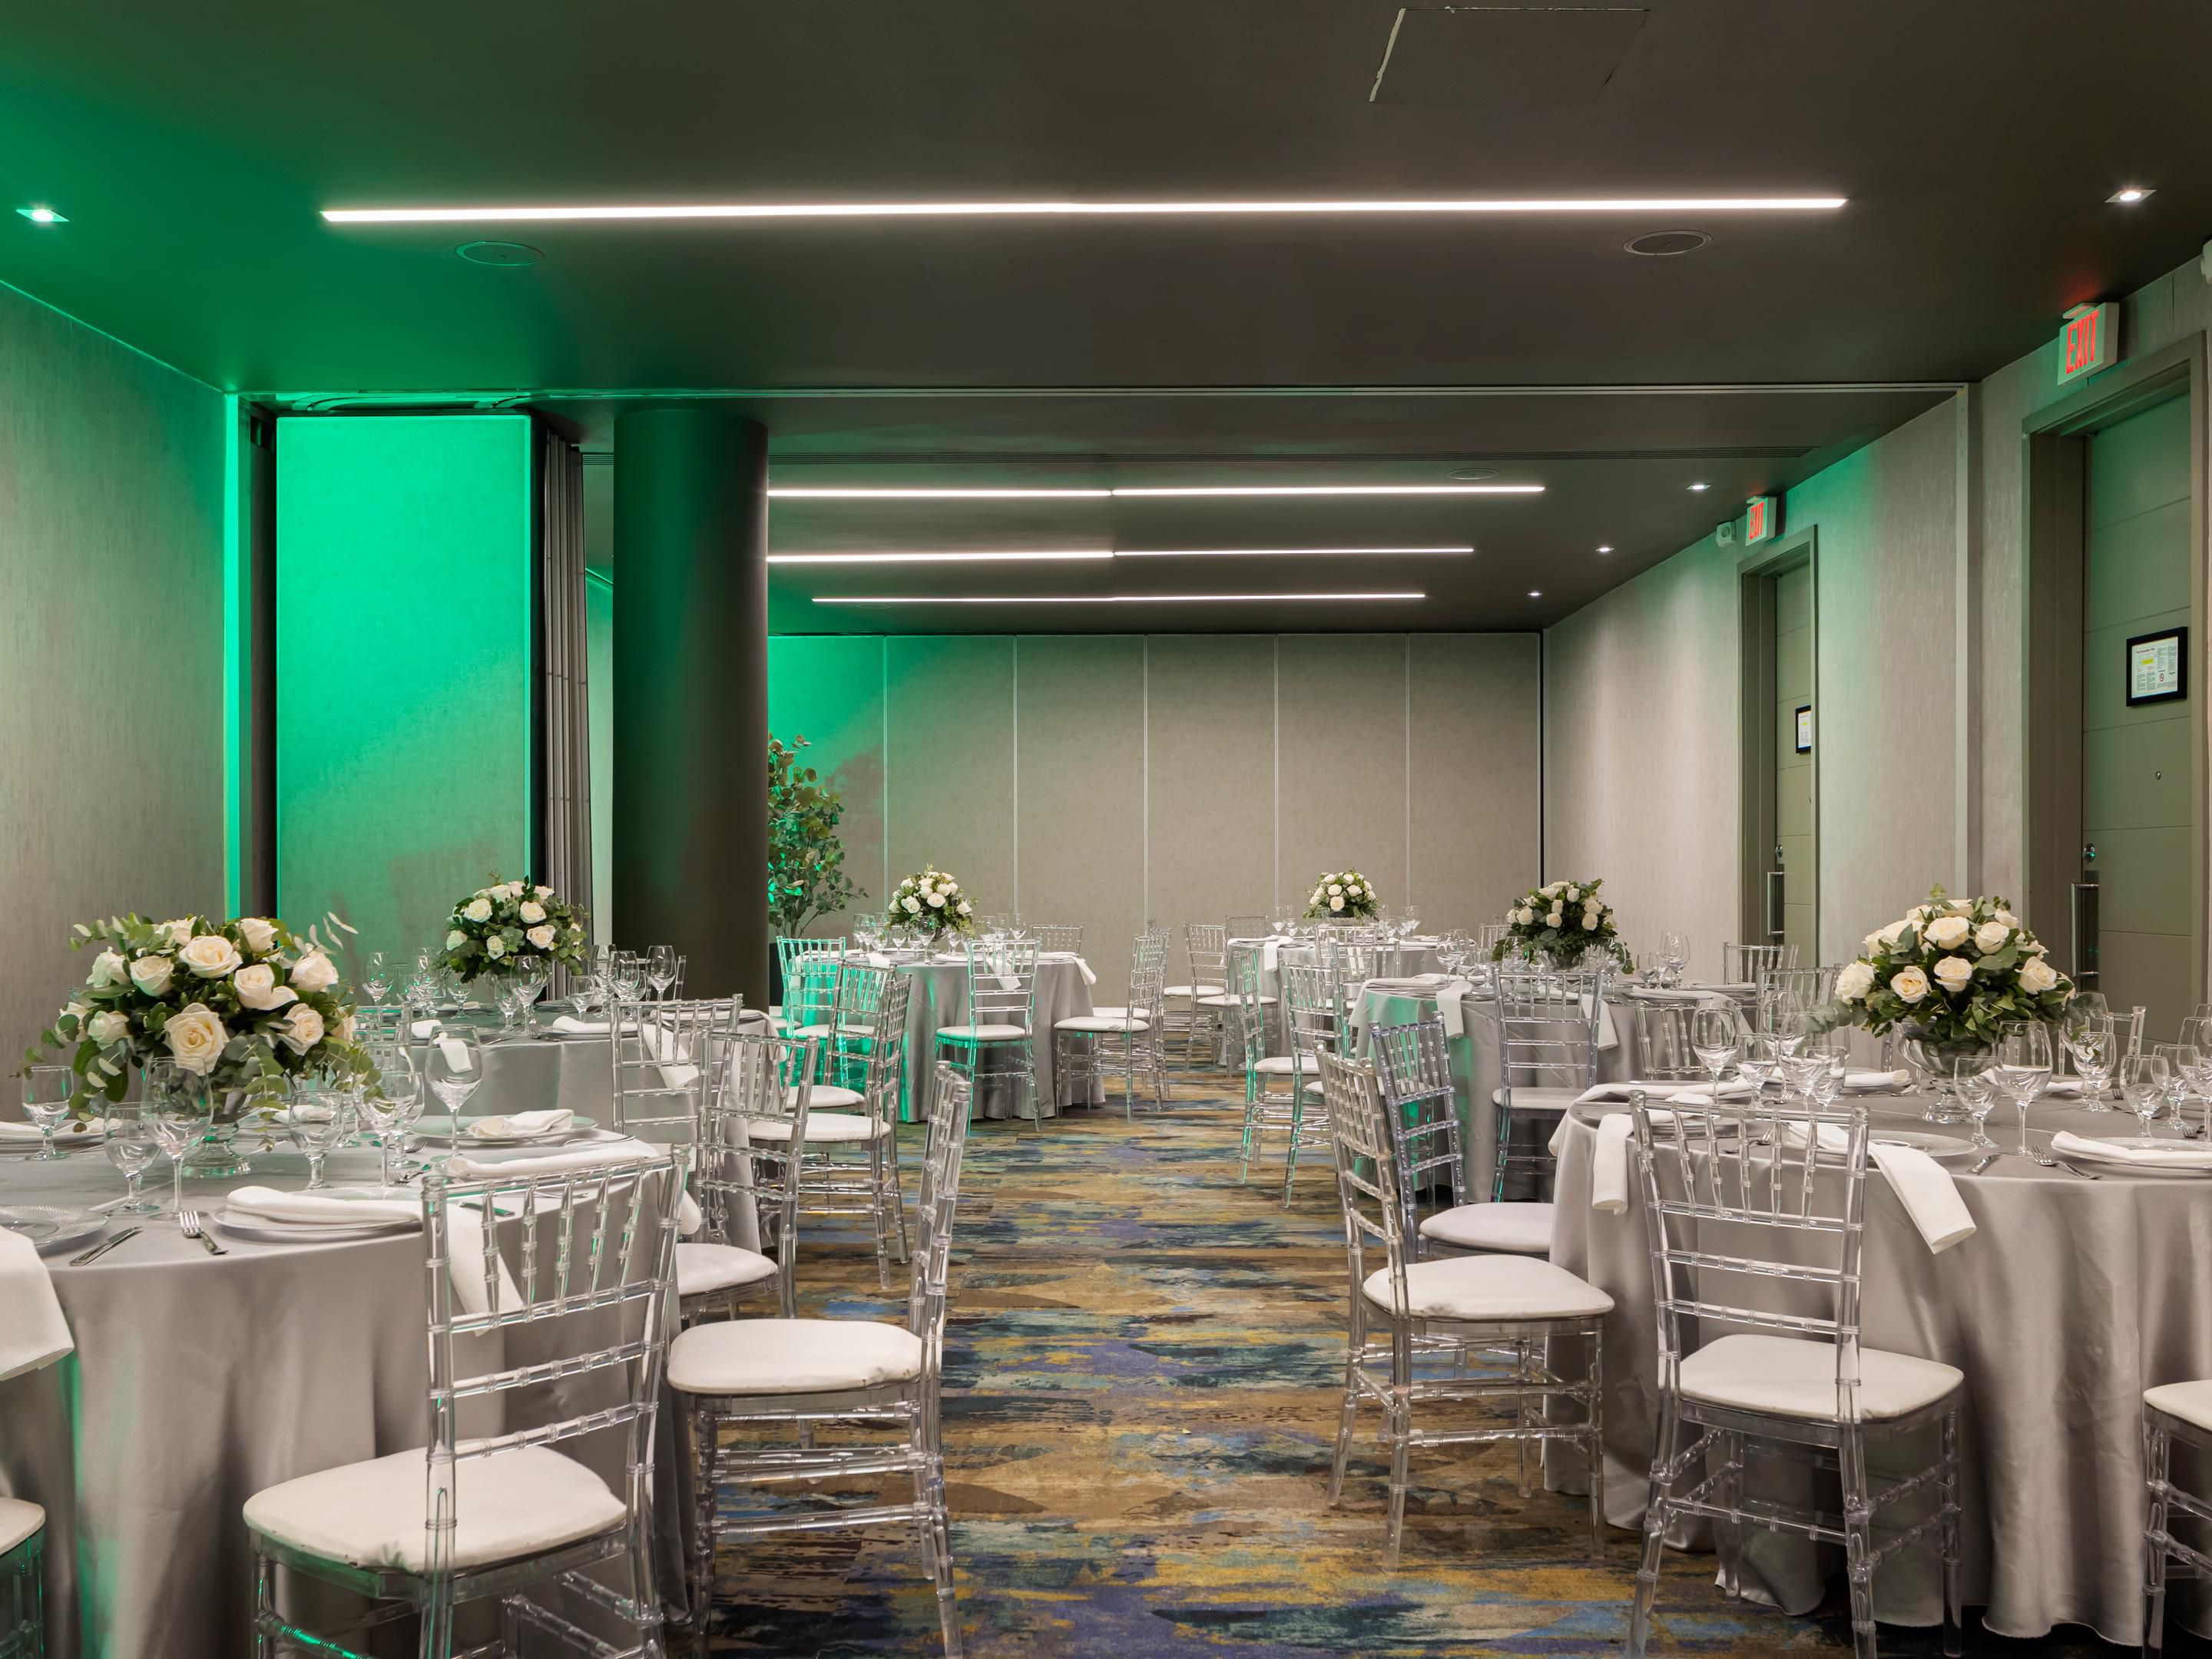 Whether planning a corporate conference, business meeting, or special event, host it in our Santo Domingo hotel, featuring flexible venues and stylish meeting spaces. Choose from six versatile spaces accommodating 14 to 250 guests. Our rooms are equipped with modern A/V equipment, free Wi-Fi, and customizable catering services.